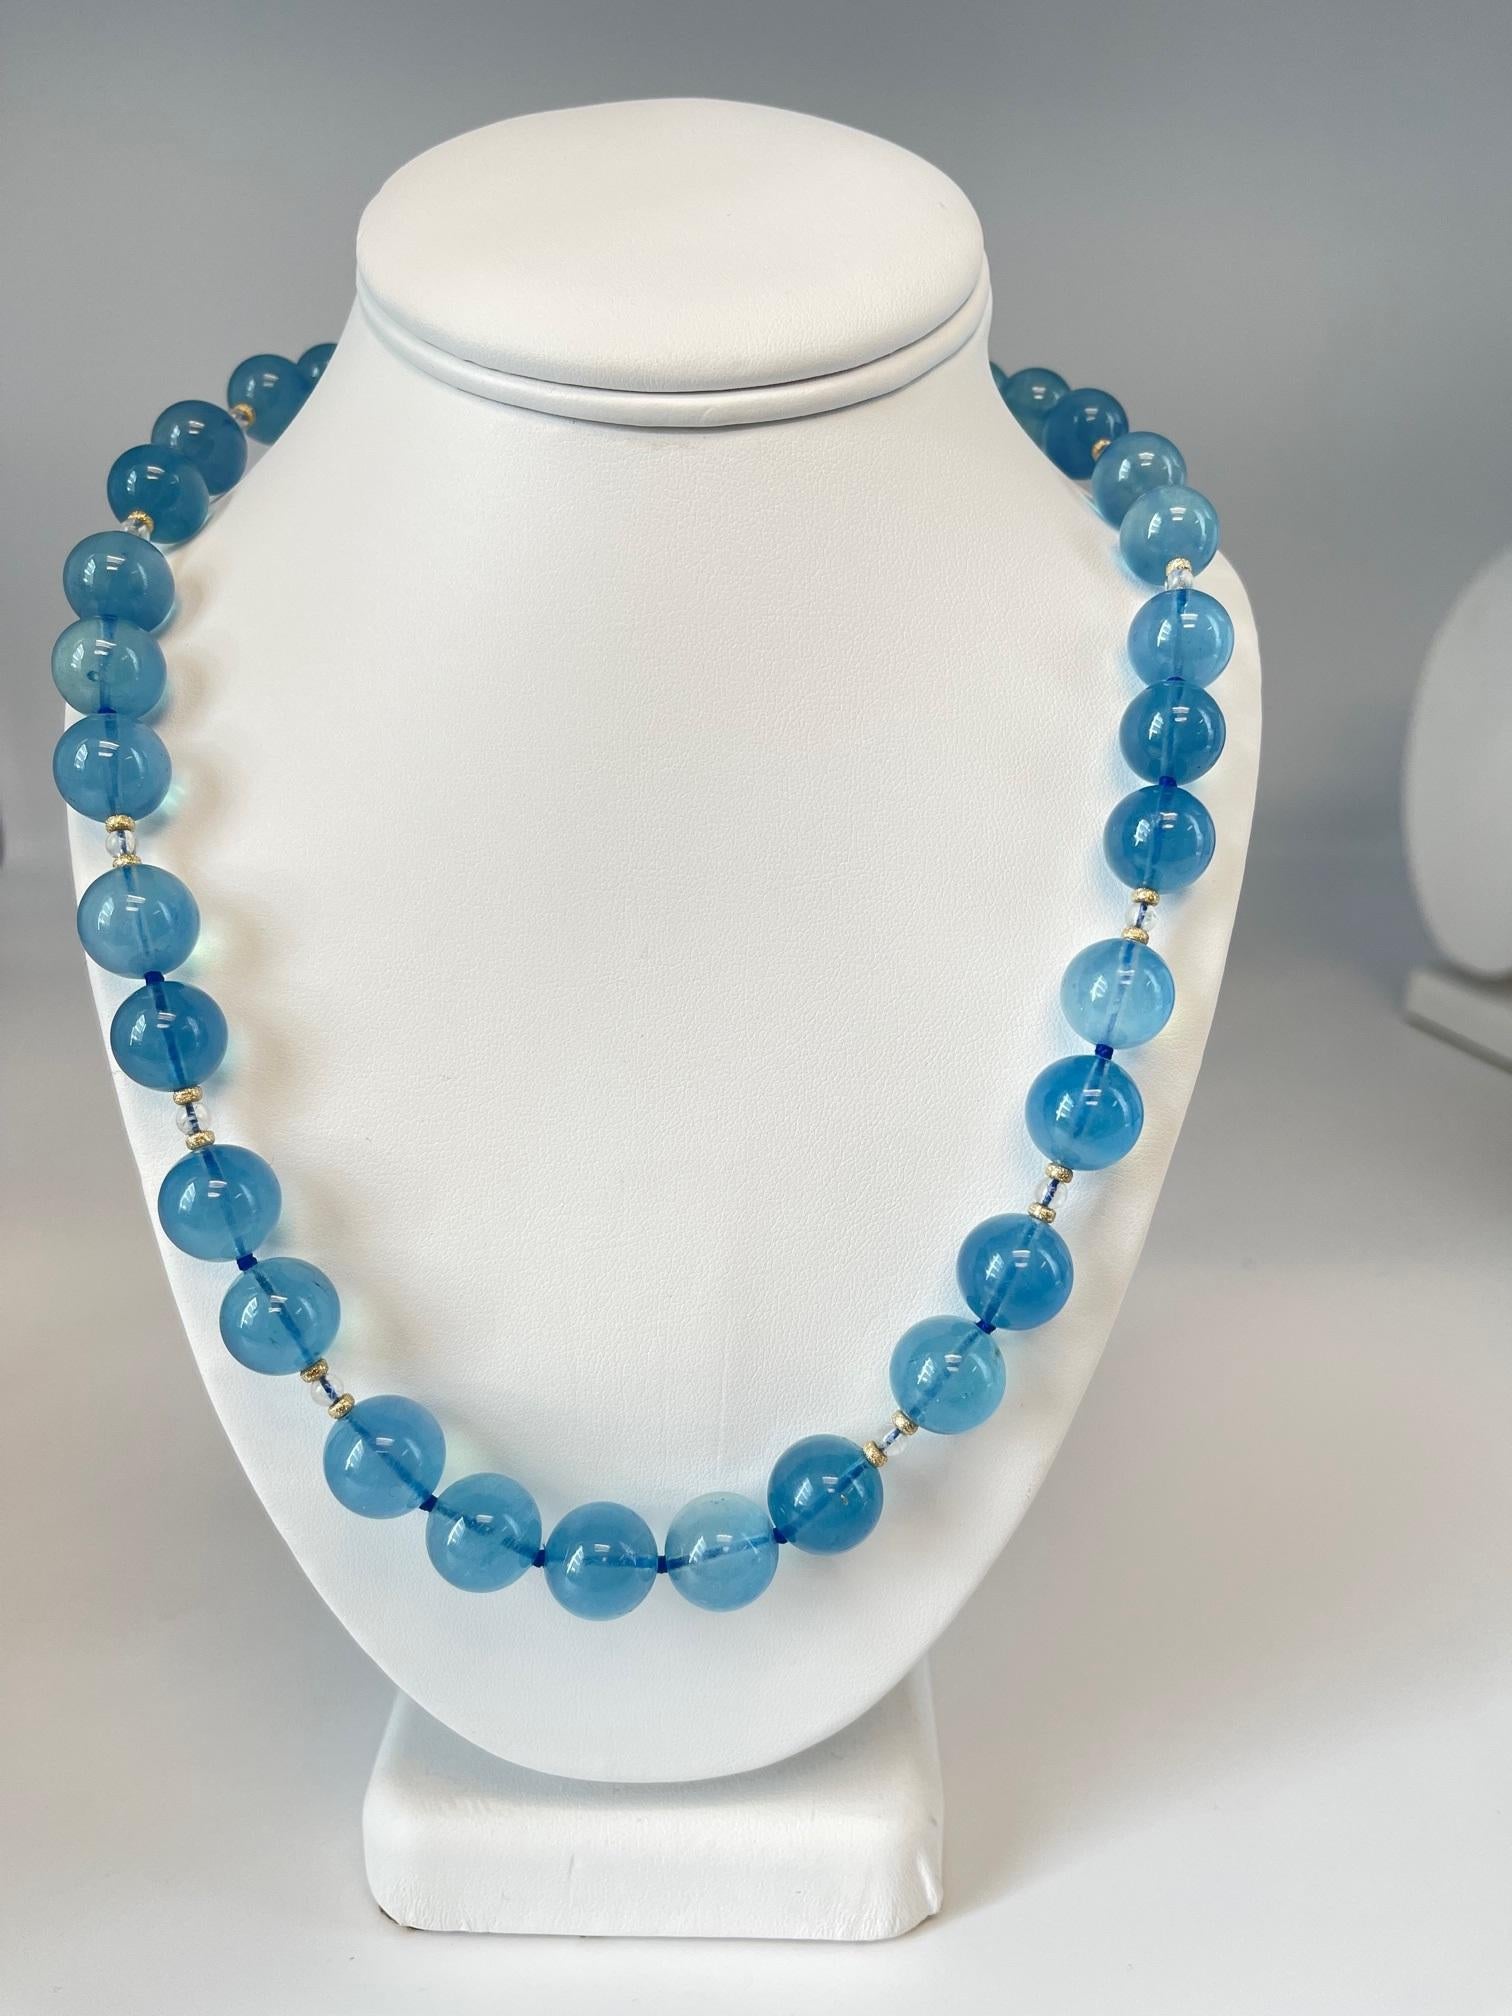 13-14mm Aquamarine and Moonstone Beaded Necklace with 14k Yellow Gold Accents  For Sale 2